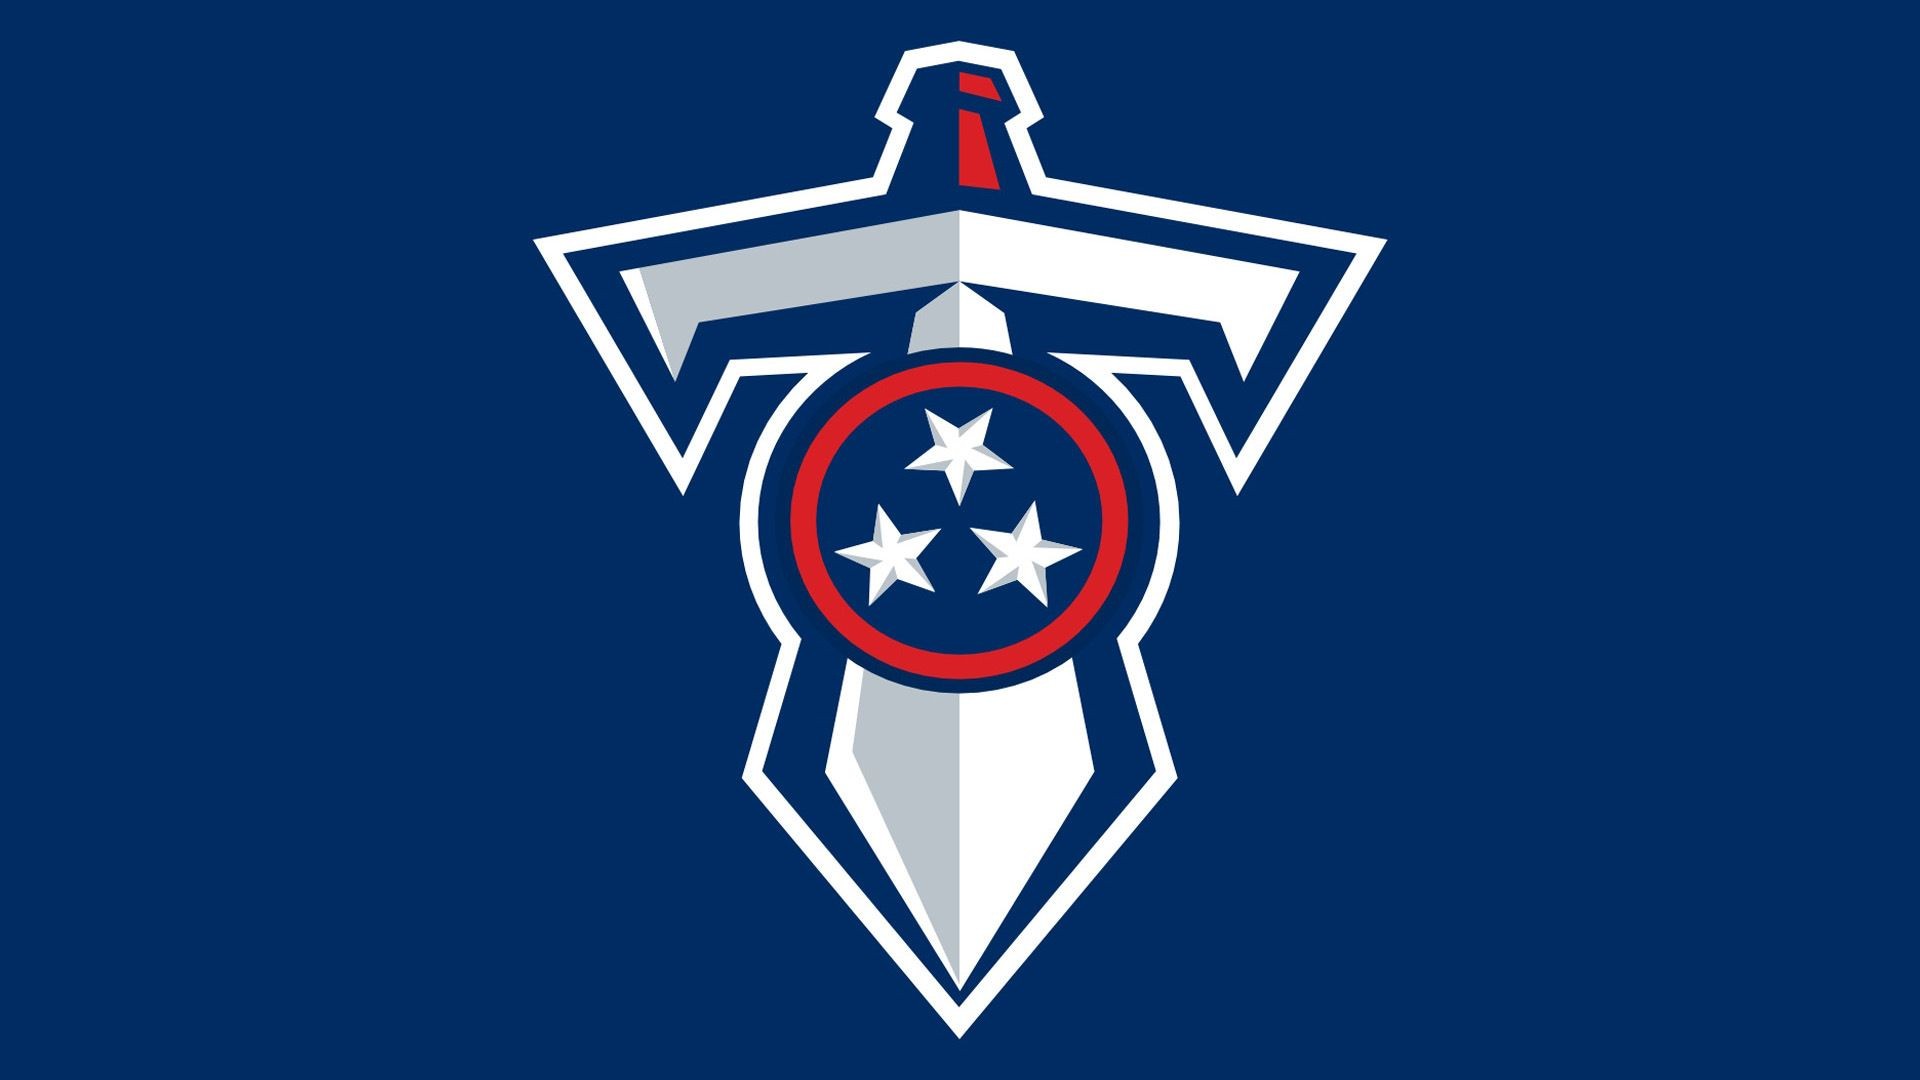 Tennessee Titans Backgrounds HD With high-resolution 1920X1080 pixel. You can use this wallpaper for your Mac or Windows Desktop Background, iPhone, Android or Tablet and another Smartphone device